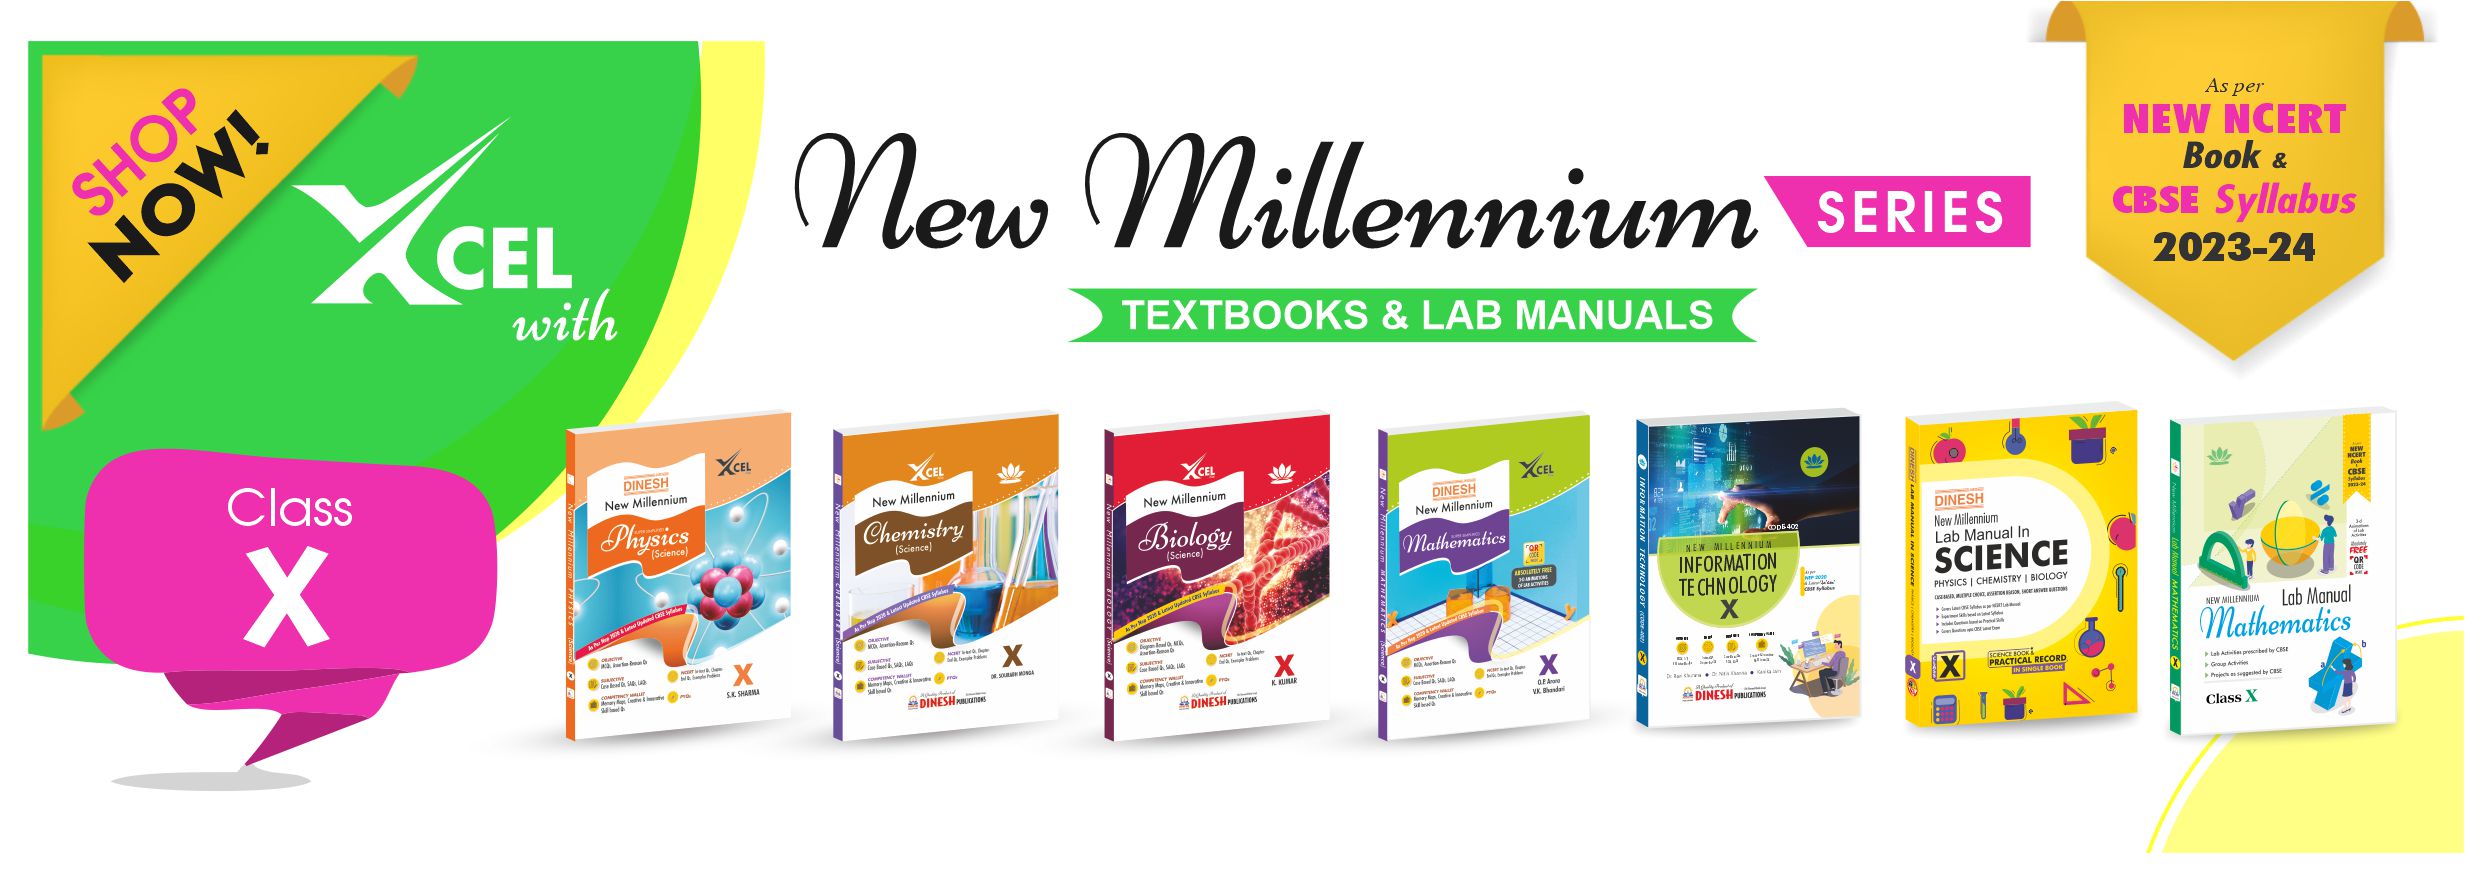 Textbooks and Labmanuals 2023-24